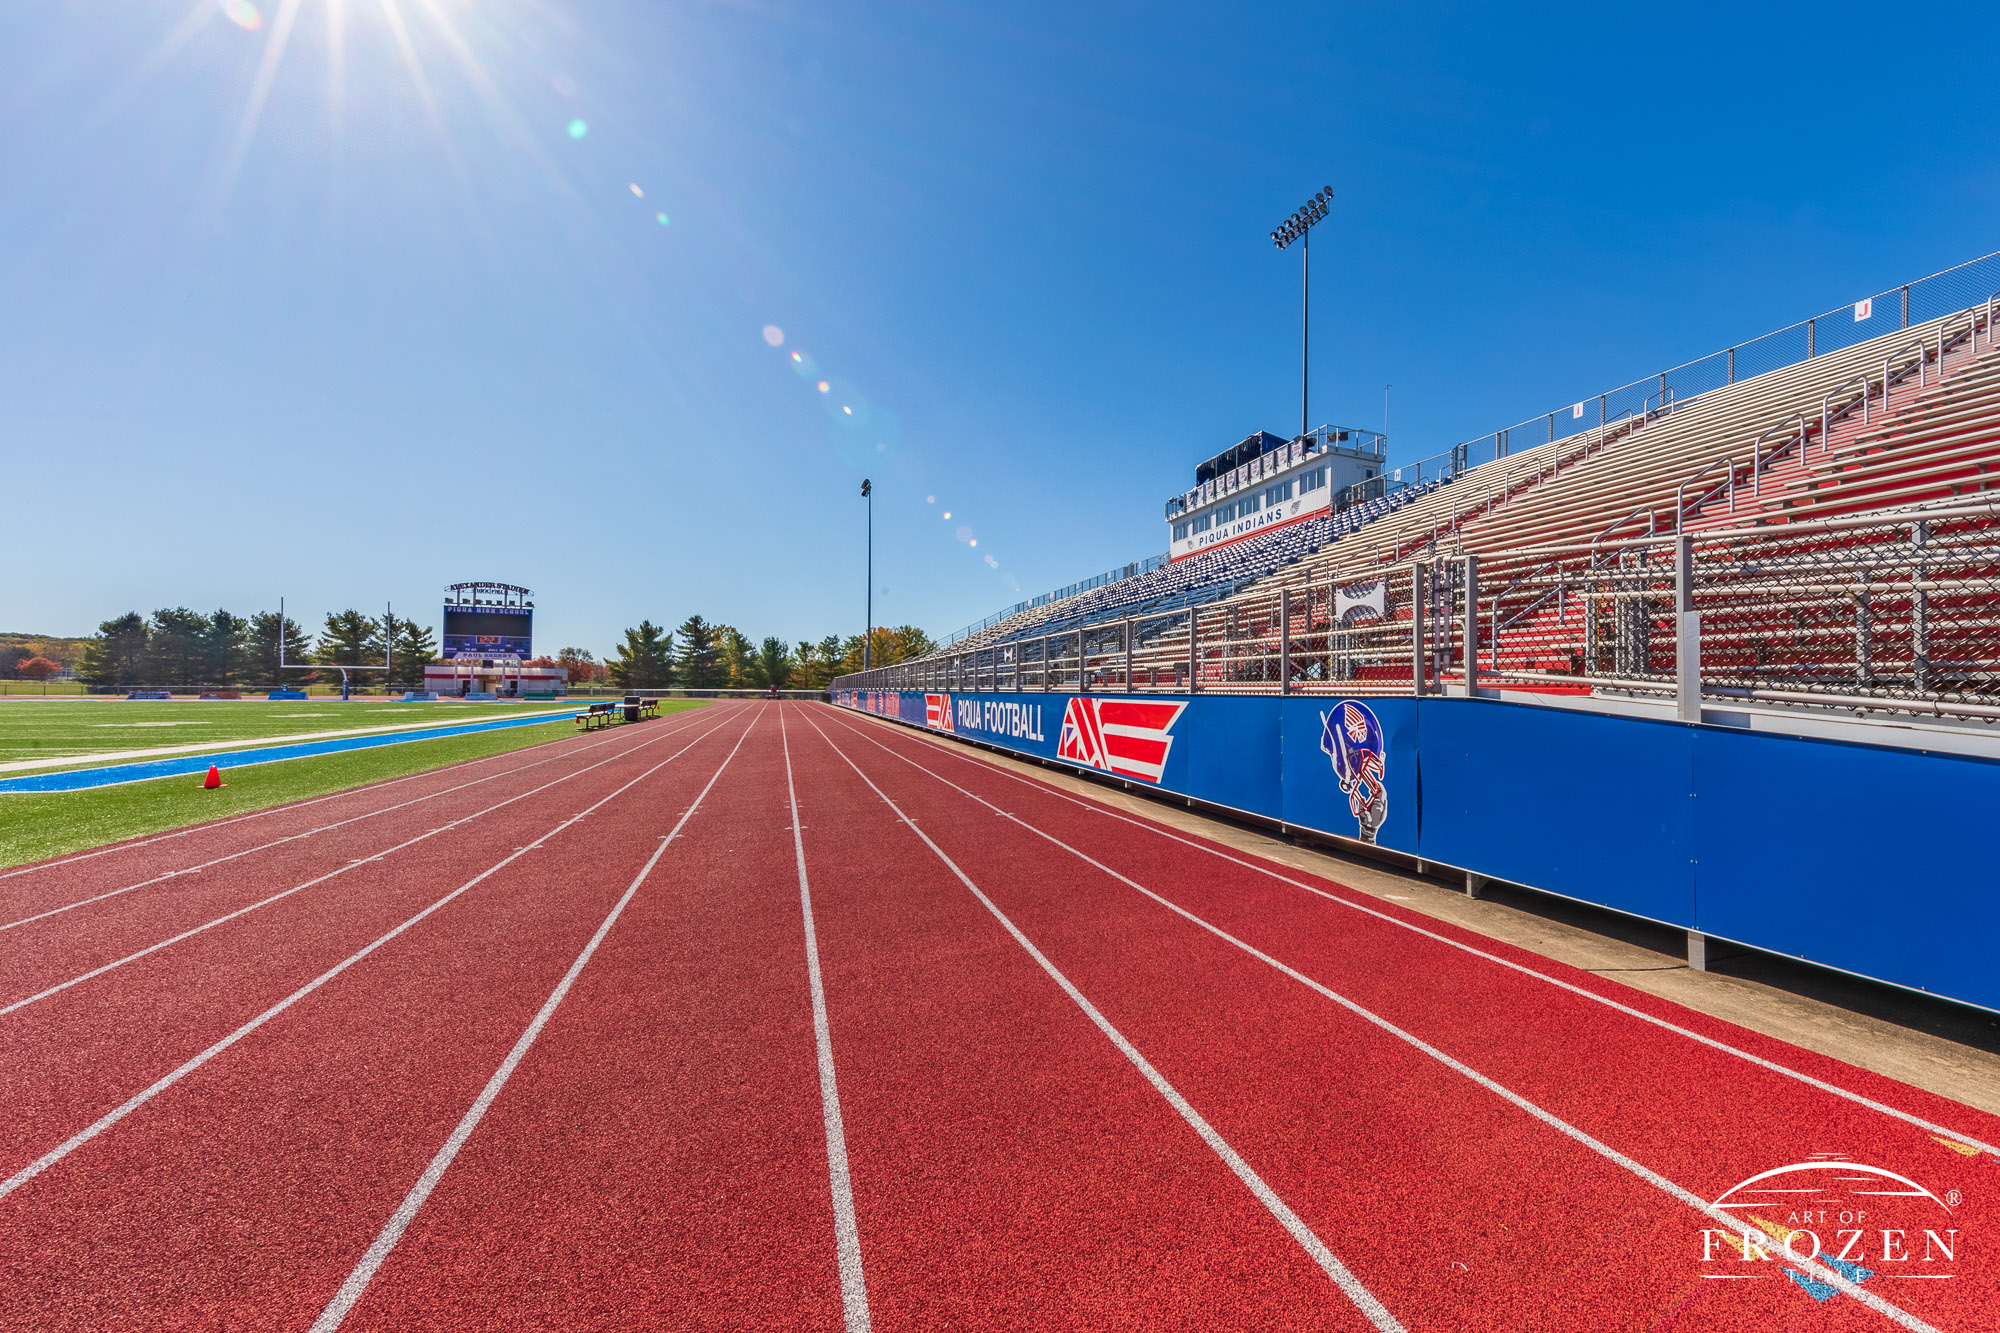 The Piqua Ohio High School Stadium is an impressive facility with AstroTurf which displays bright red and blue colors under clear blue Miami County Ohio skies